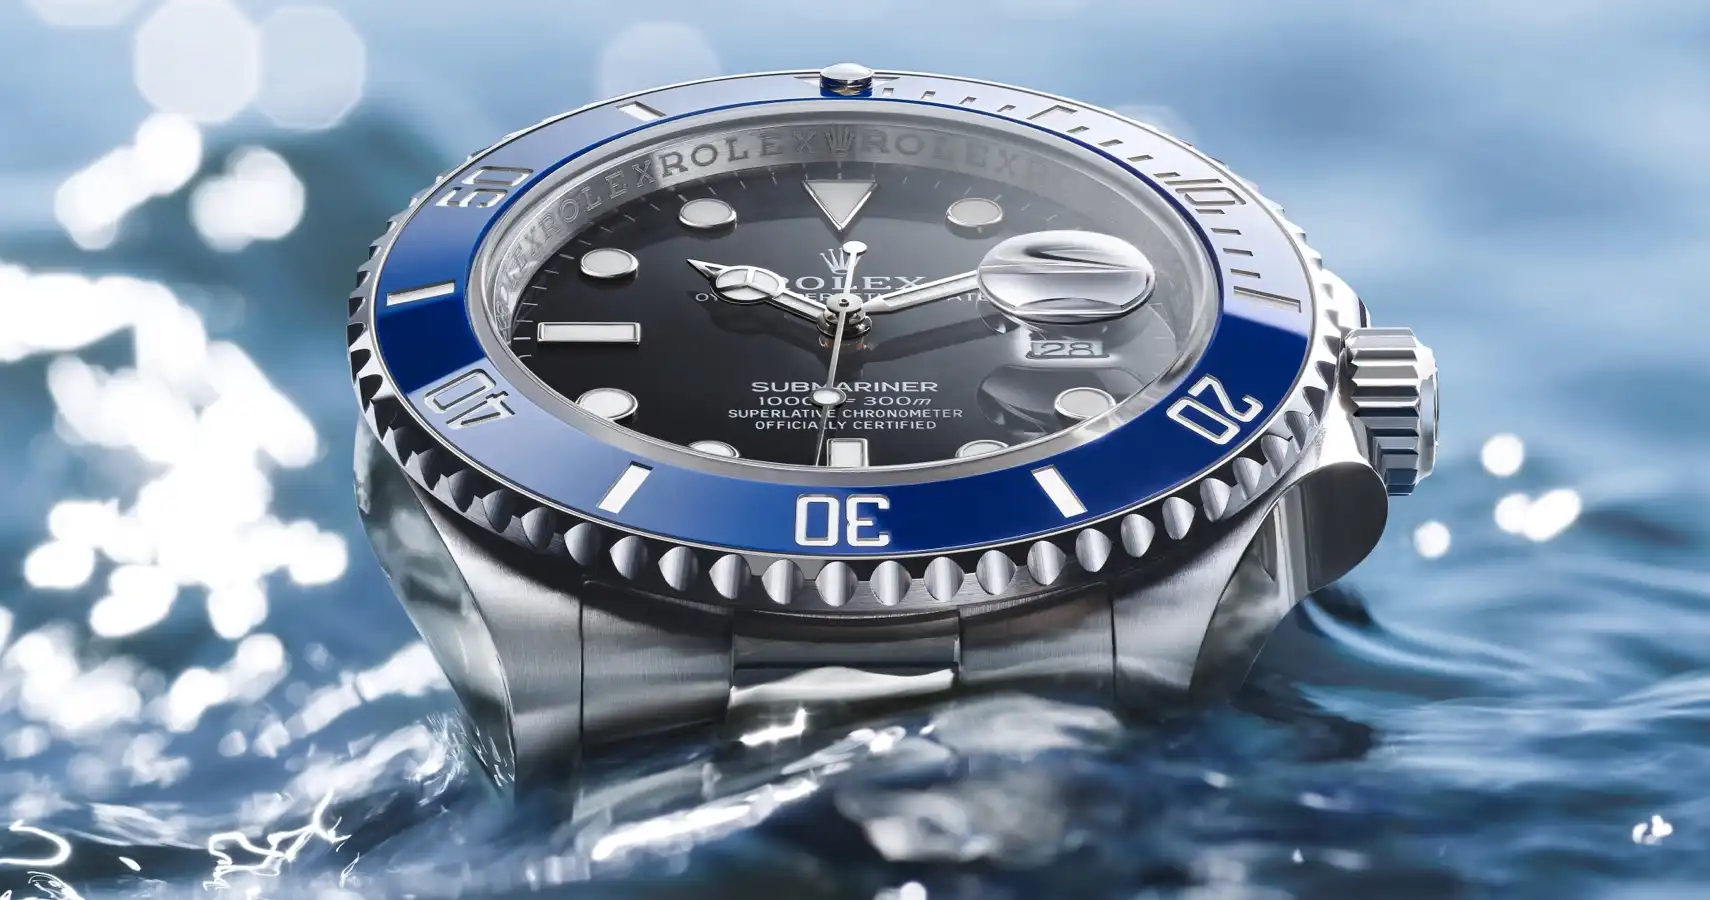 The reference among <br>divers’ watches